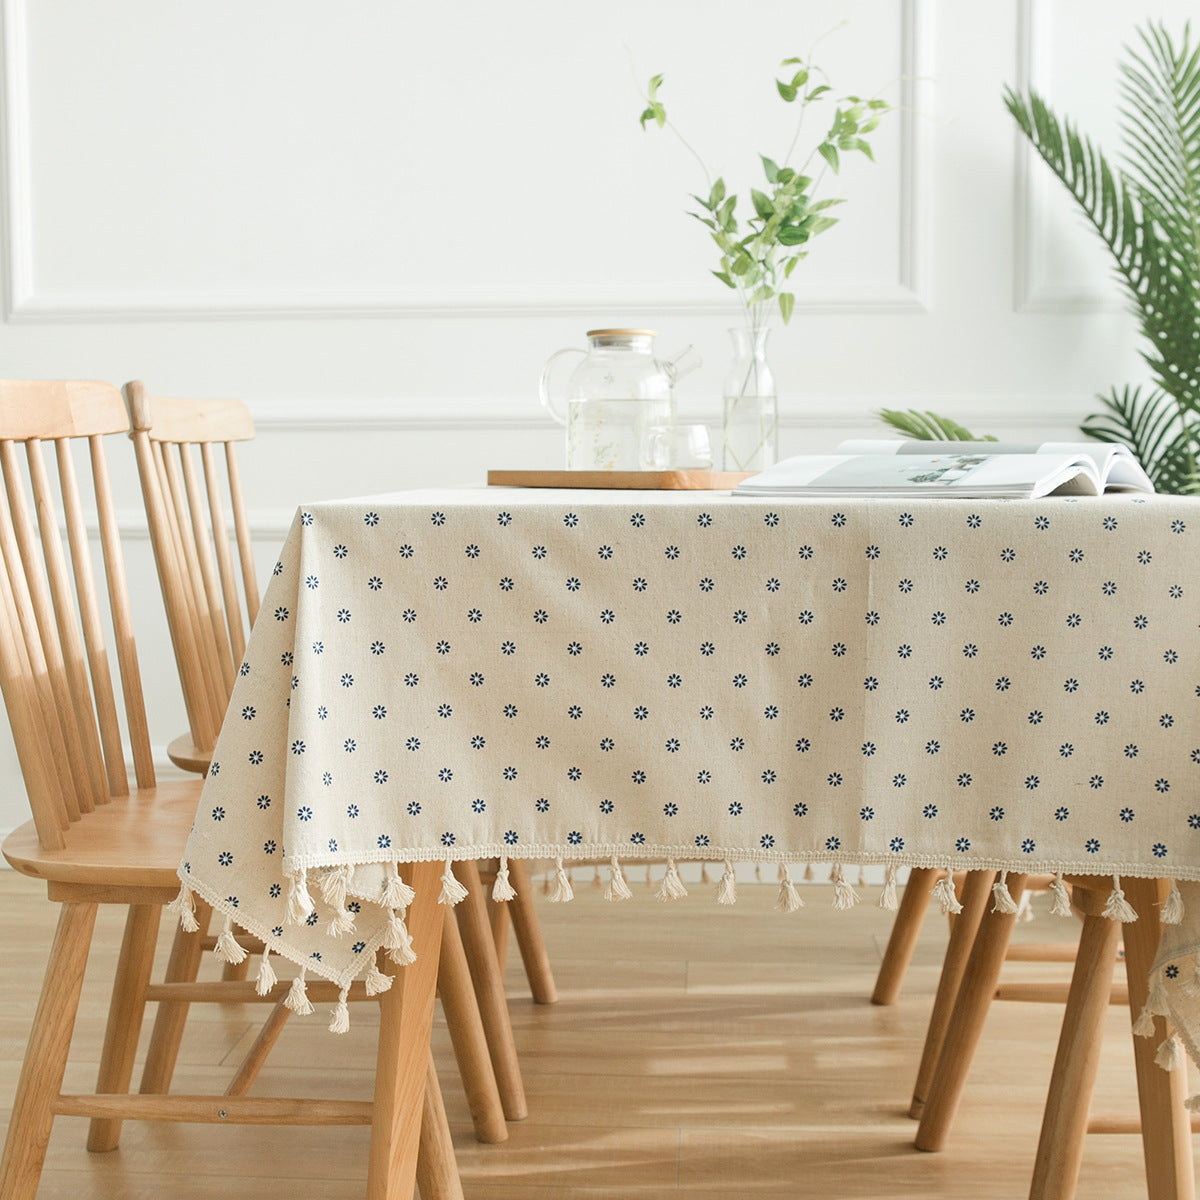 Bulk Cotton Linen Tablecloth with little Lace Table Cover for Home Dinning Tabletop Home Decoration Wholesale